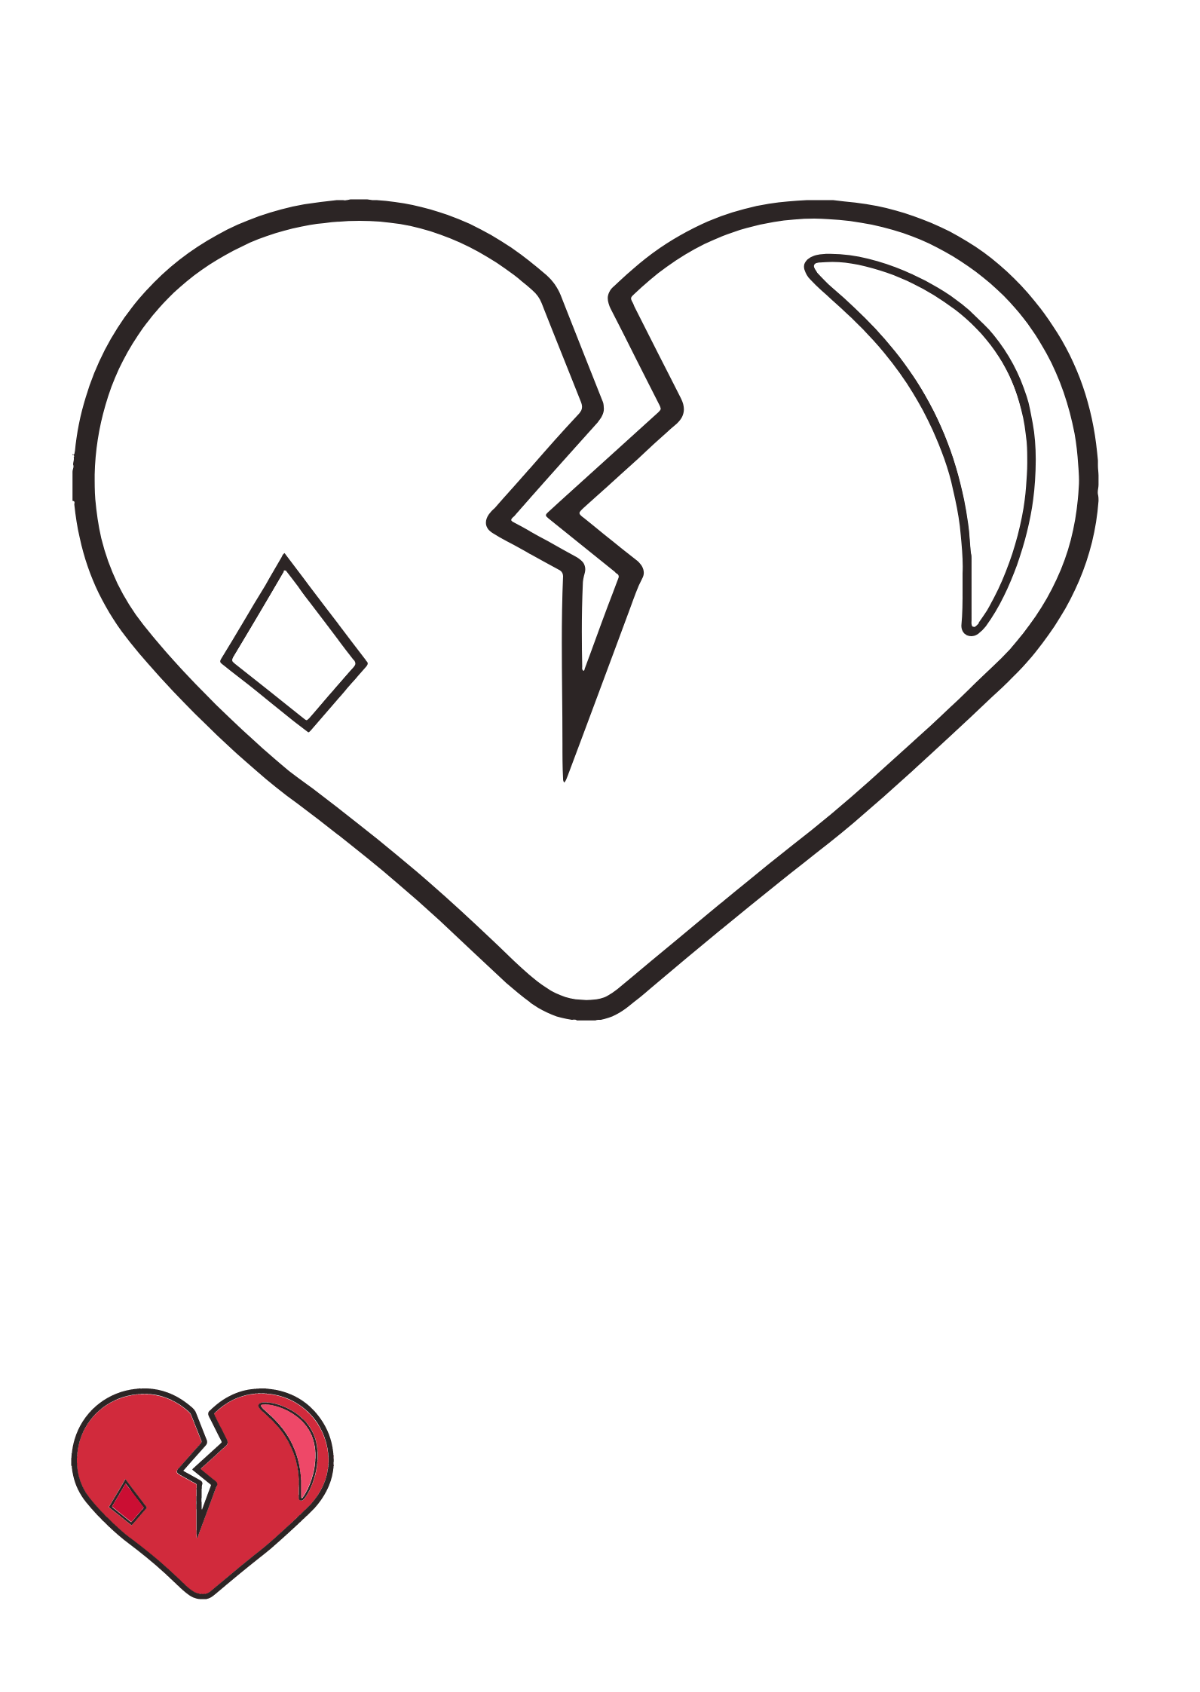 Broken Heart Shape Coloring Page Template